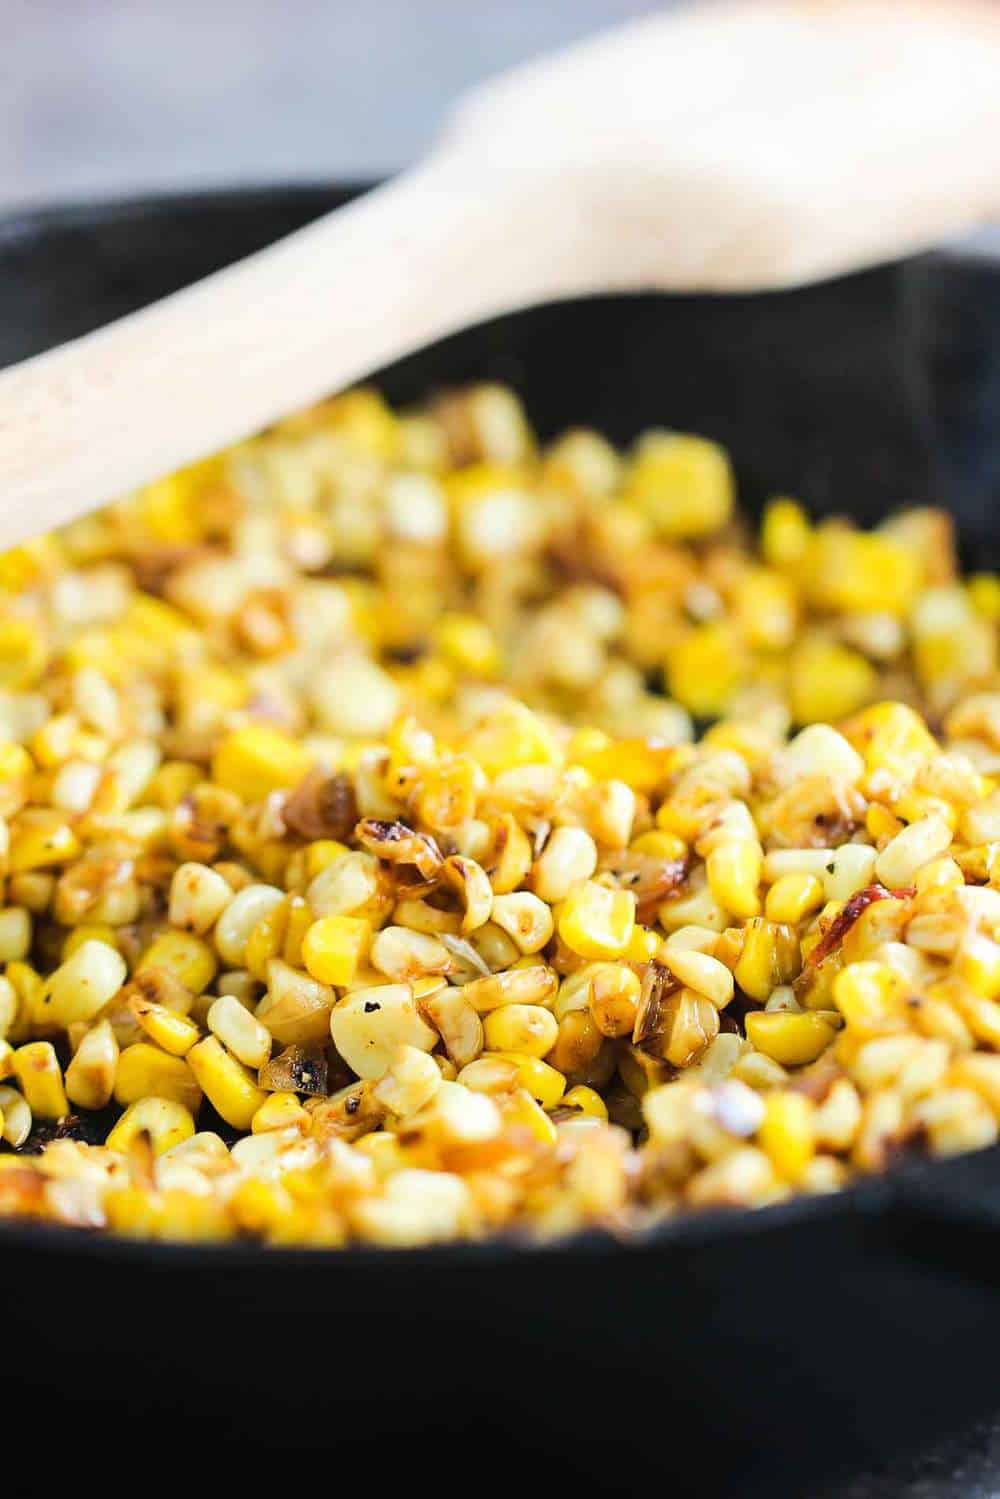 A close-up view of corn kernels that have been roasted in a cast-iron skillet